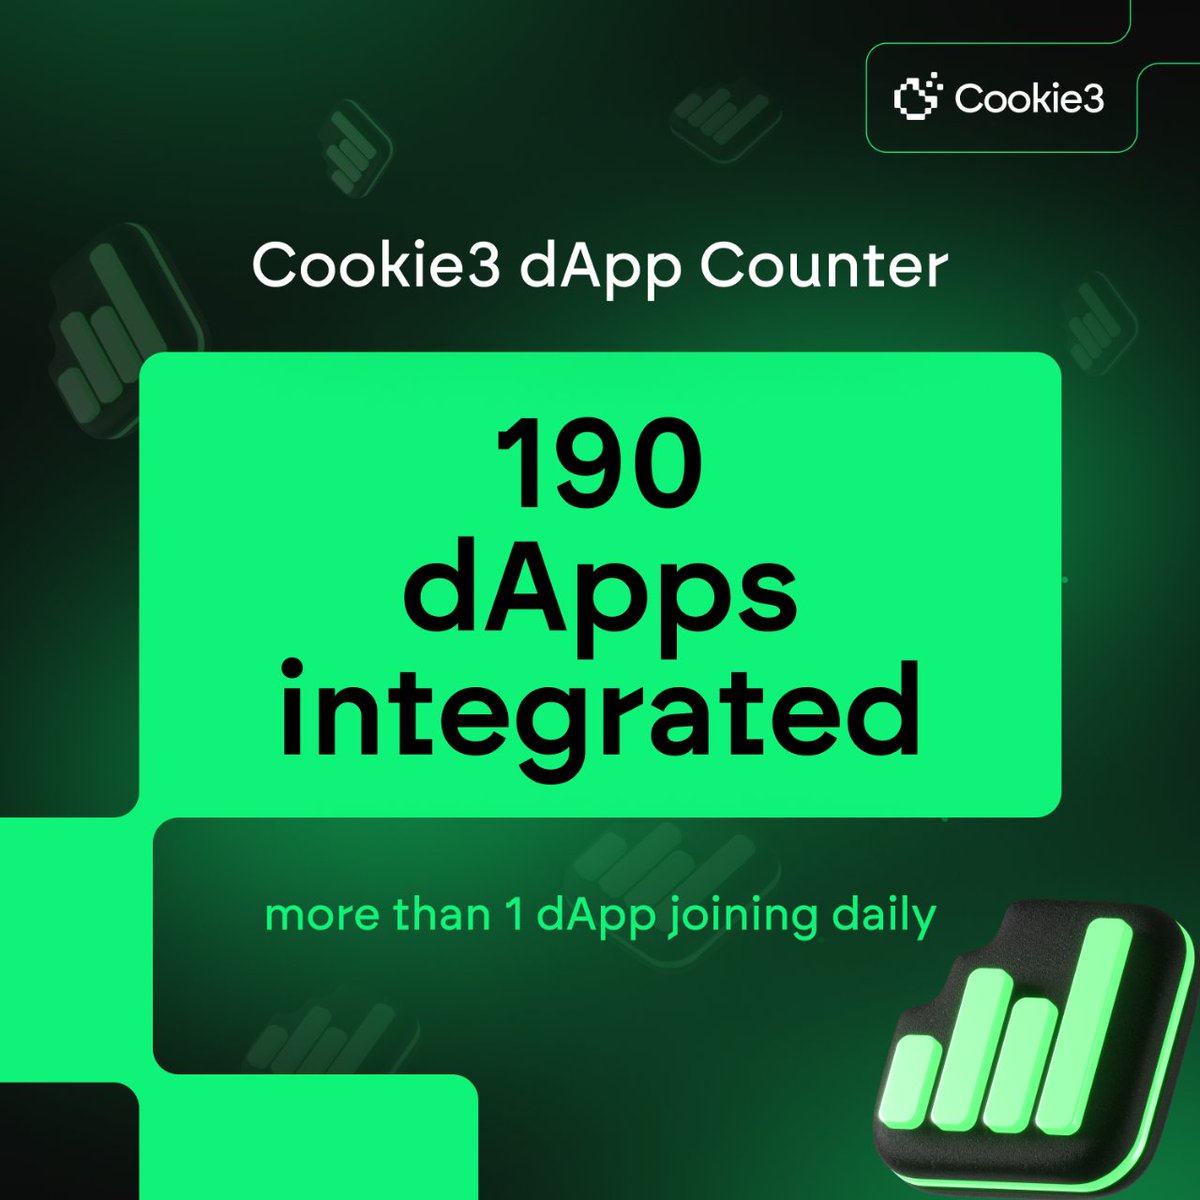 Cookie3's oven is hotter than ever, churning out fresh wins daily! 🔥🍪 This week, we added another 10 new #dApps to our roster, bringing the total to 190!  Among these projects we had @native_fi and @jaspervault join names such as @eesee_io and @LineaBuild.